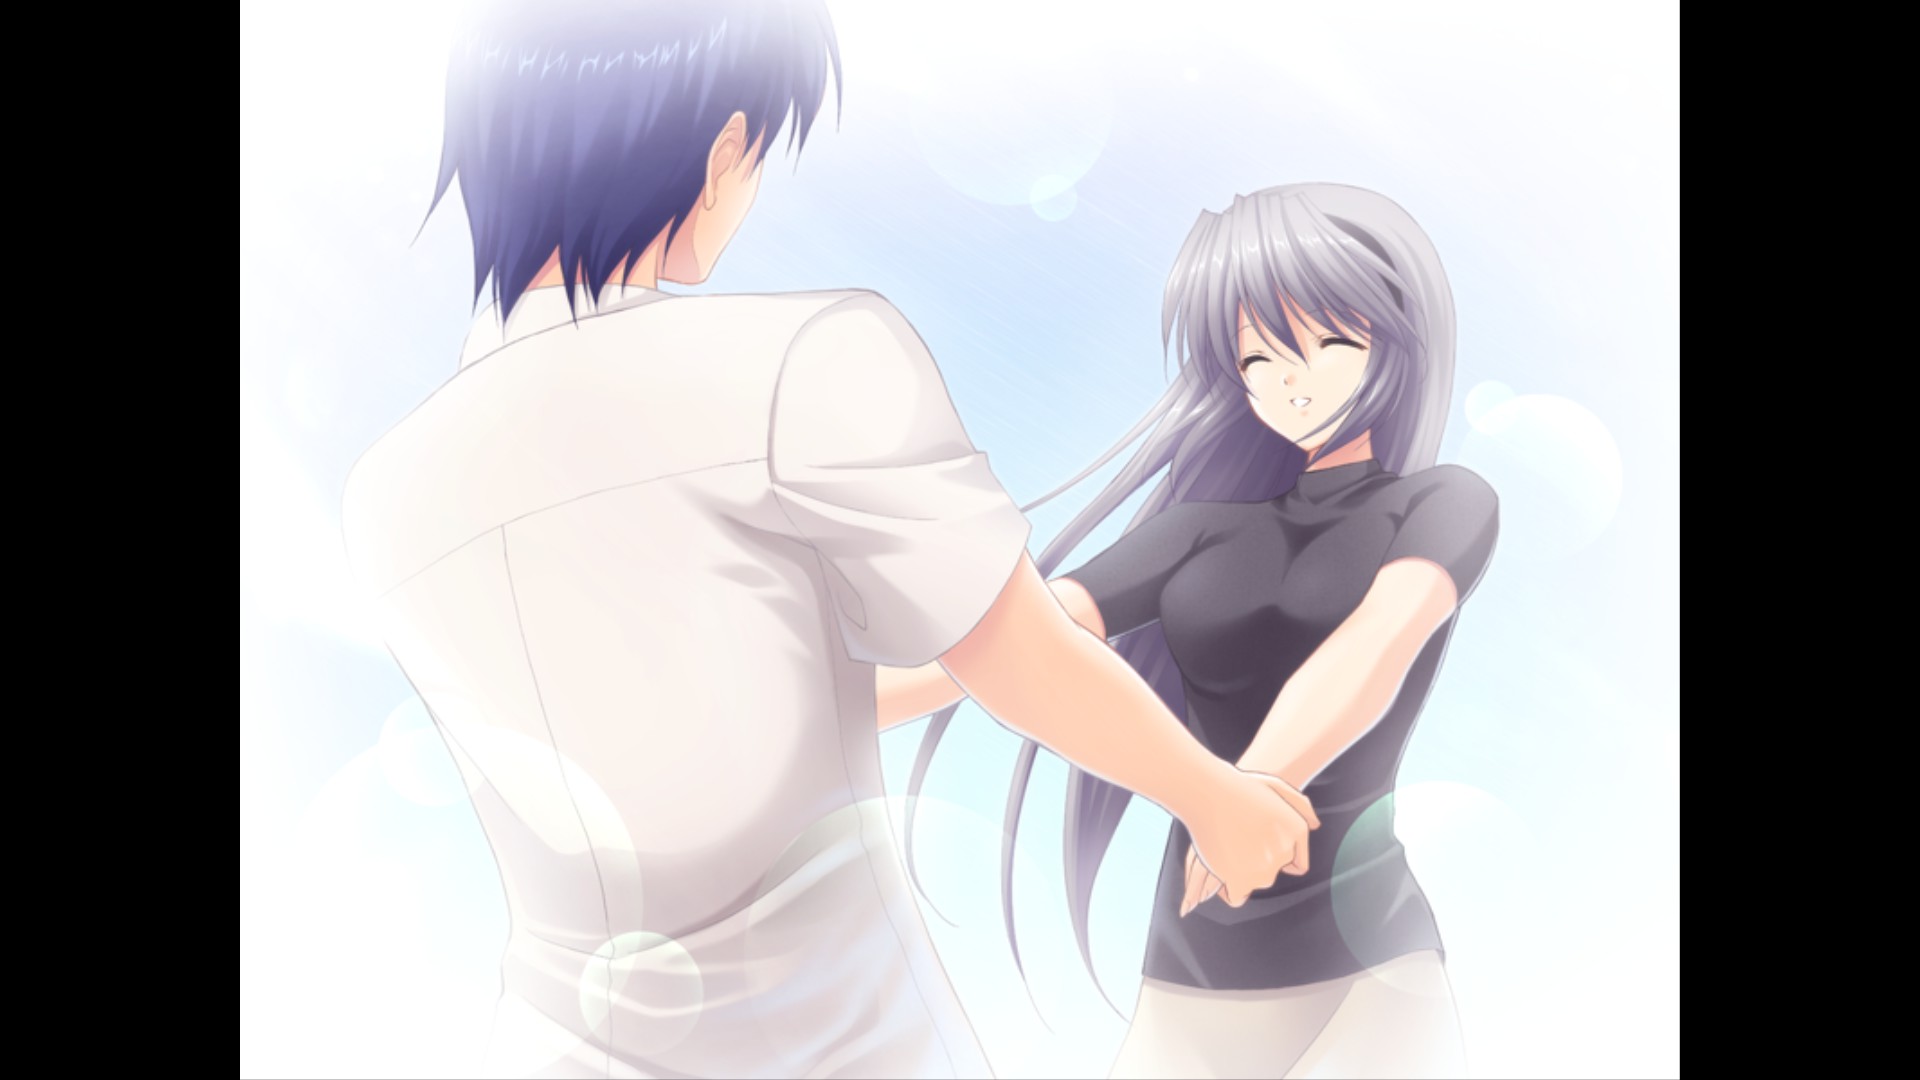 Clannad After Story's Unsatisfying Ending